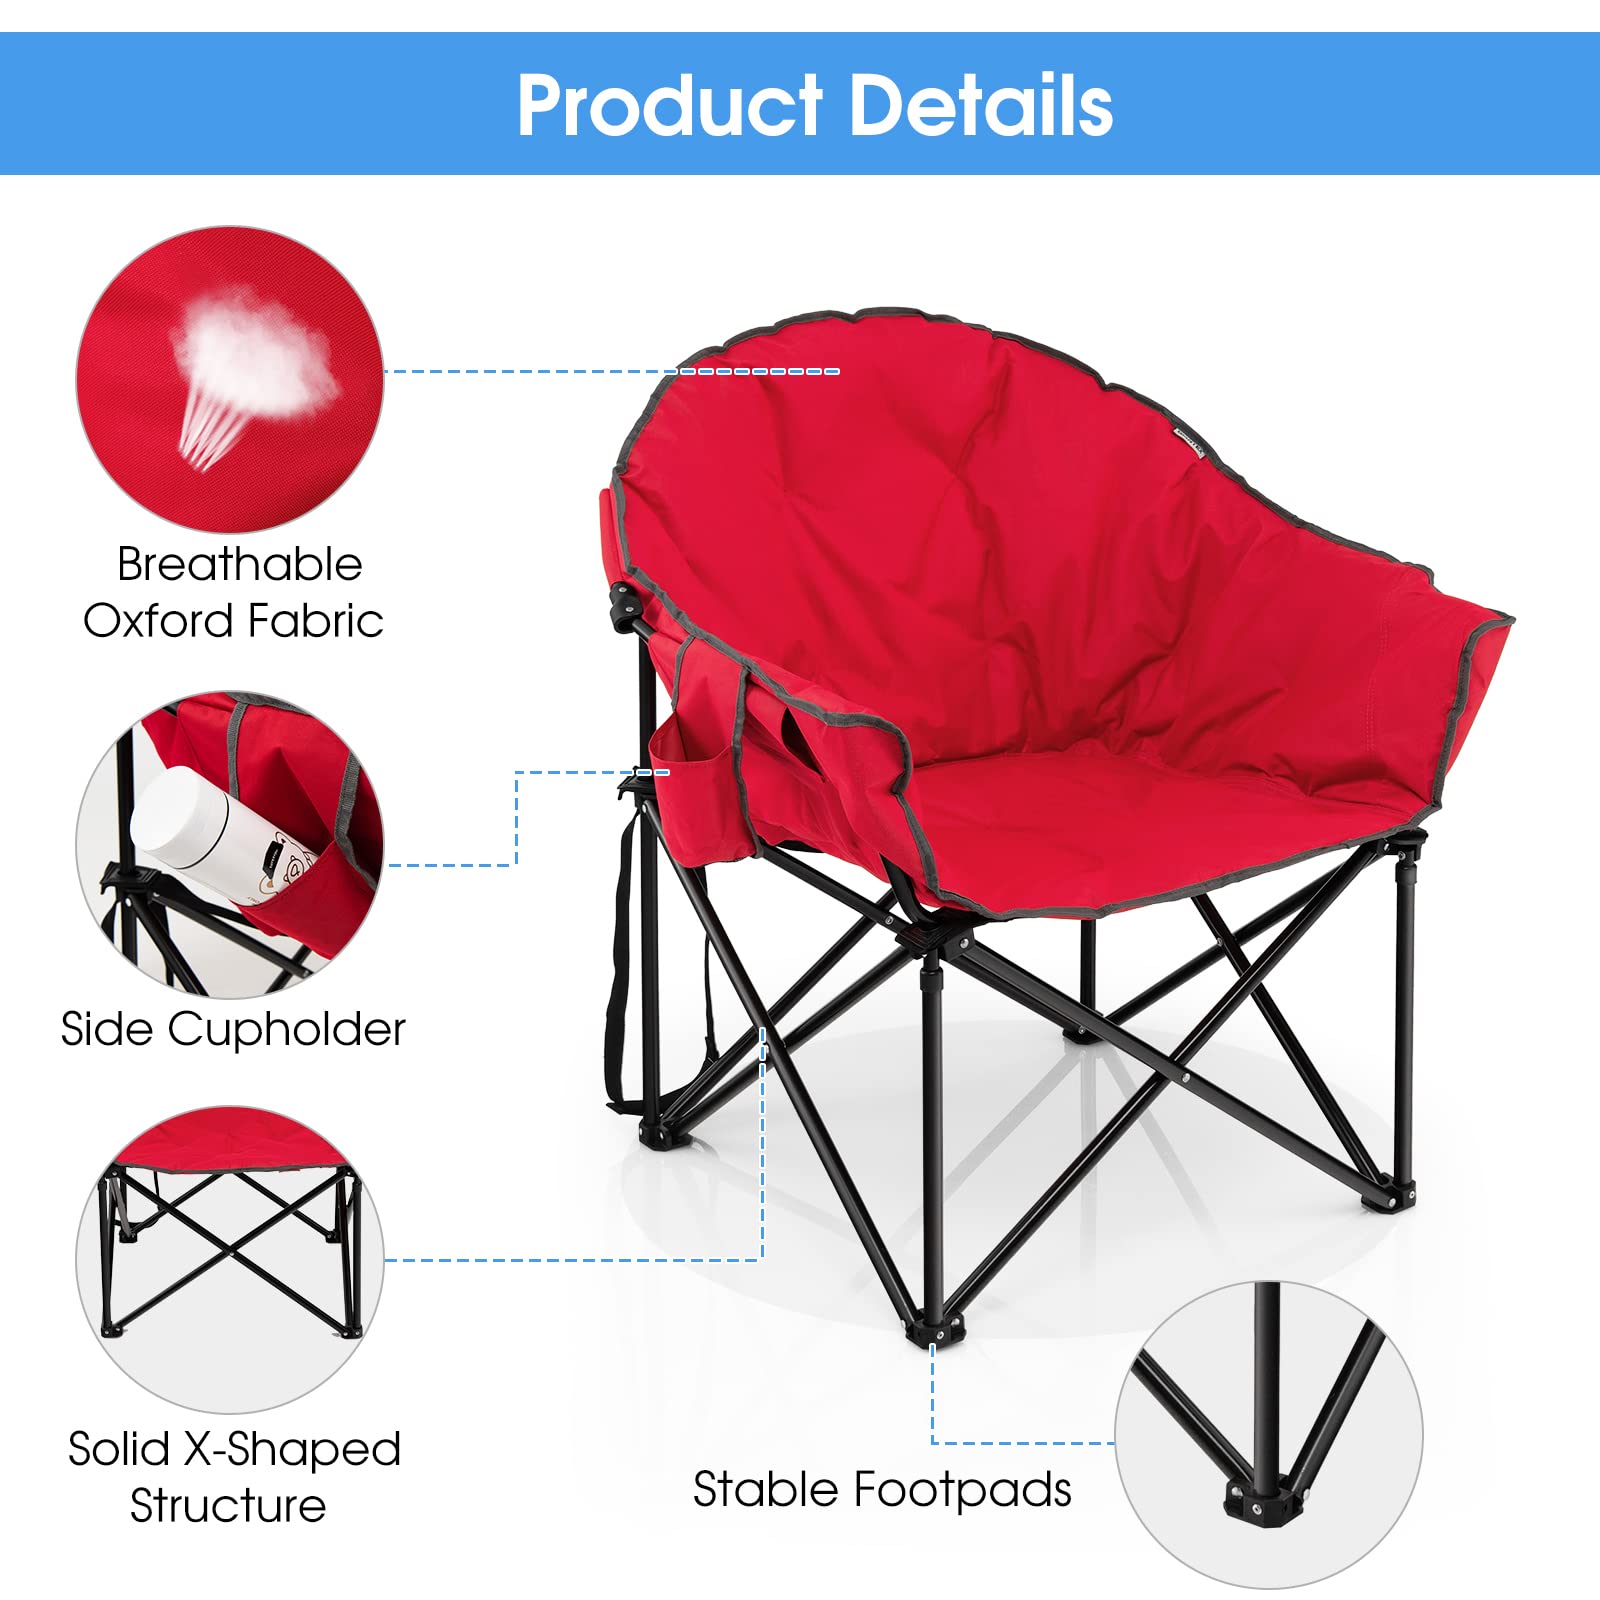 Giantex Portable Camping Chair, Lawn Chair, Outdoor Folding Chair with Cup Holder, Soft Seat